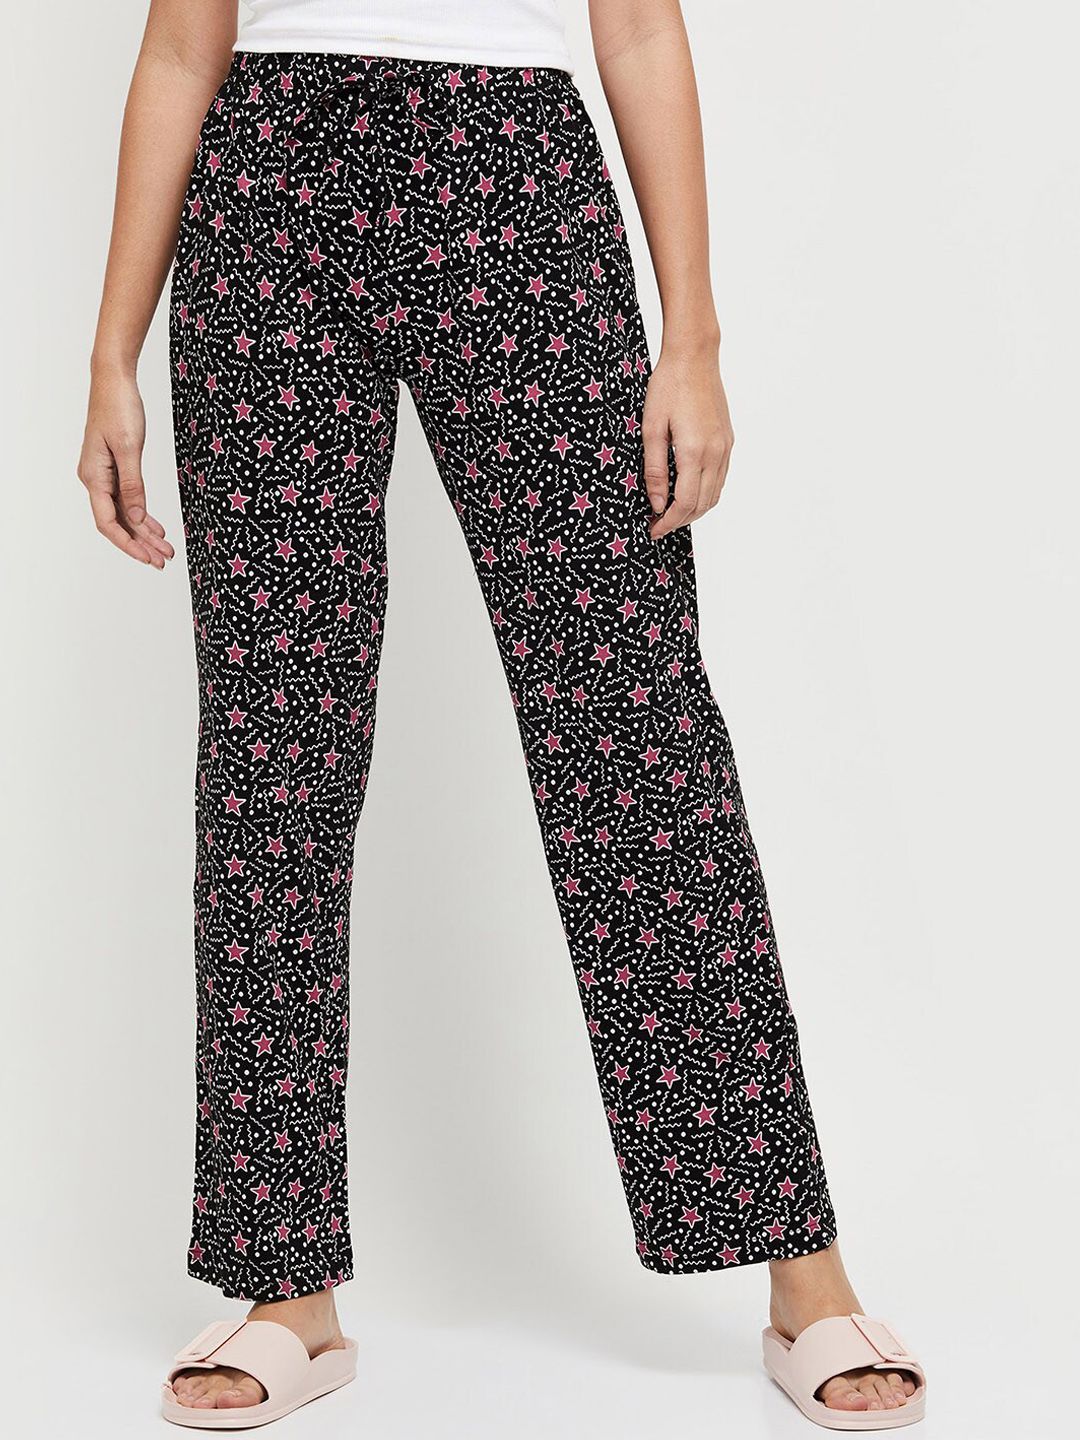 max Women Black and Pink Printed Lounge Pants Price in India